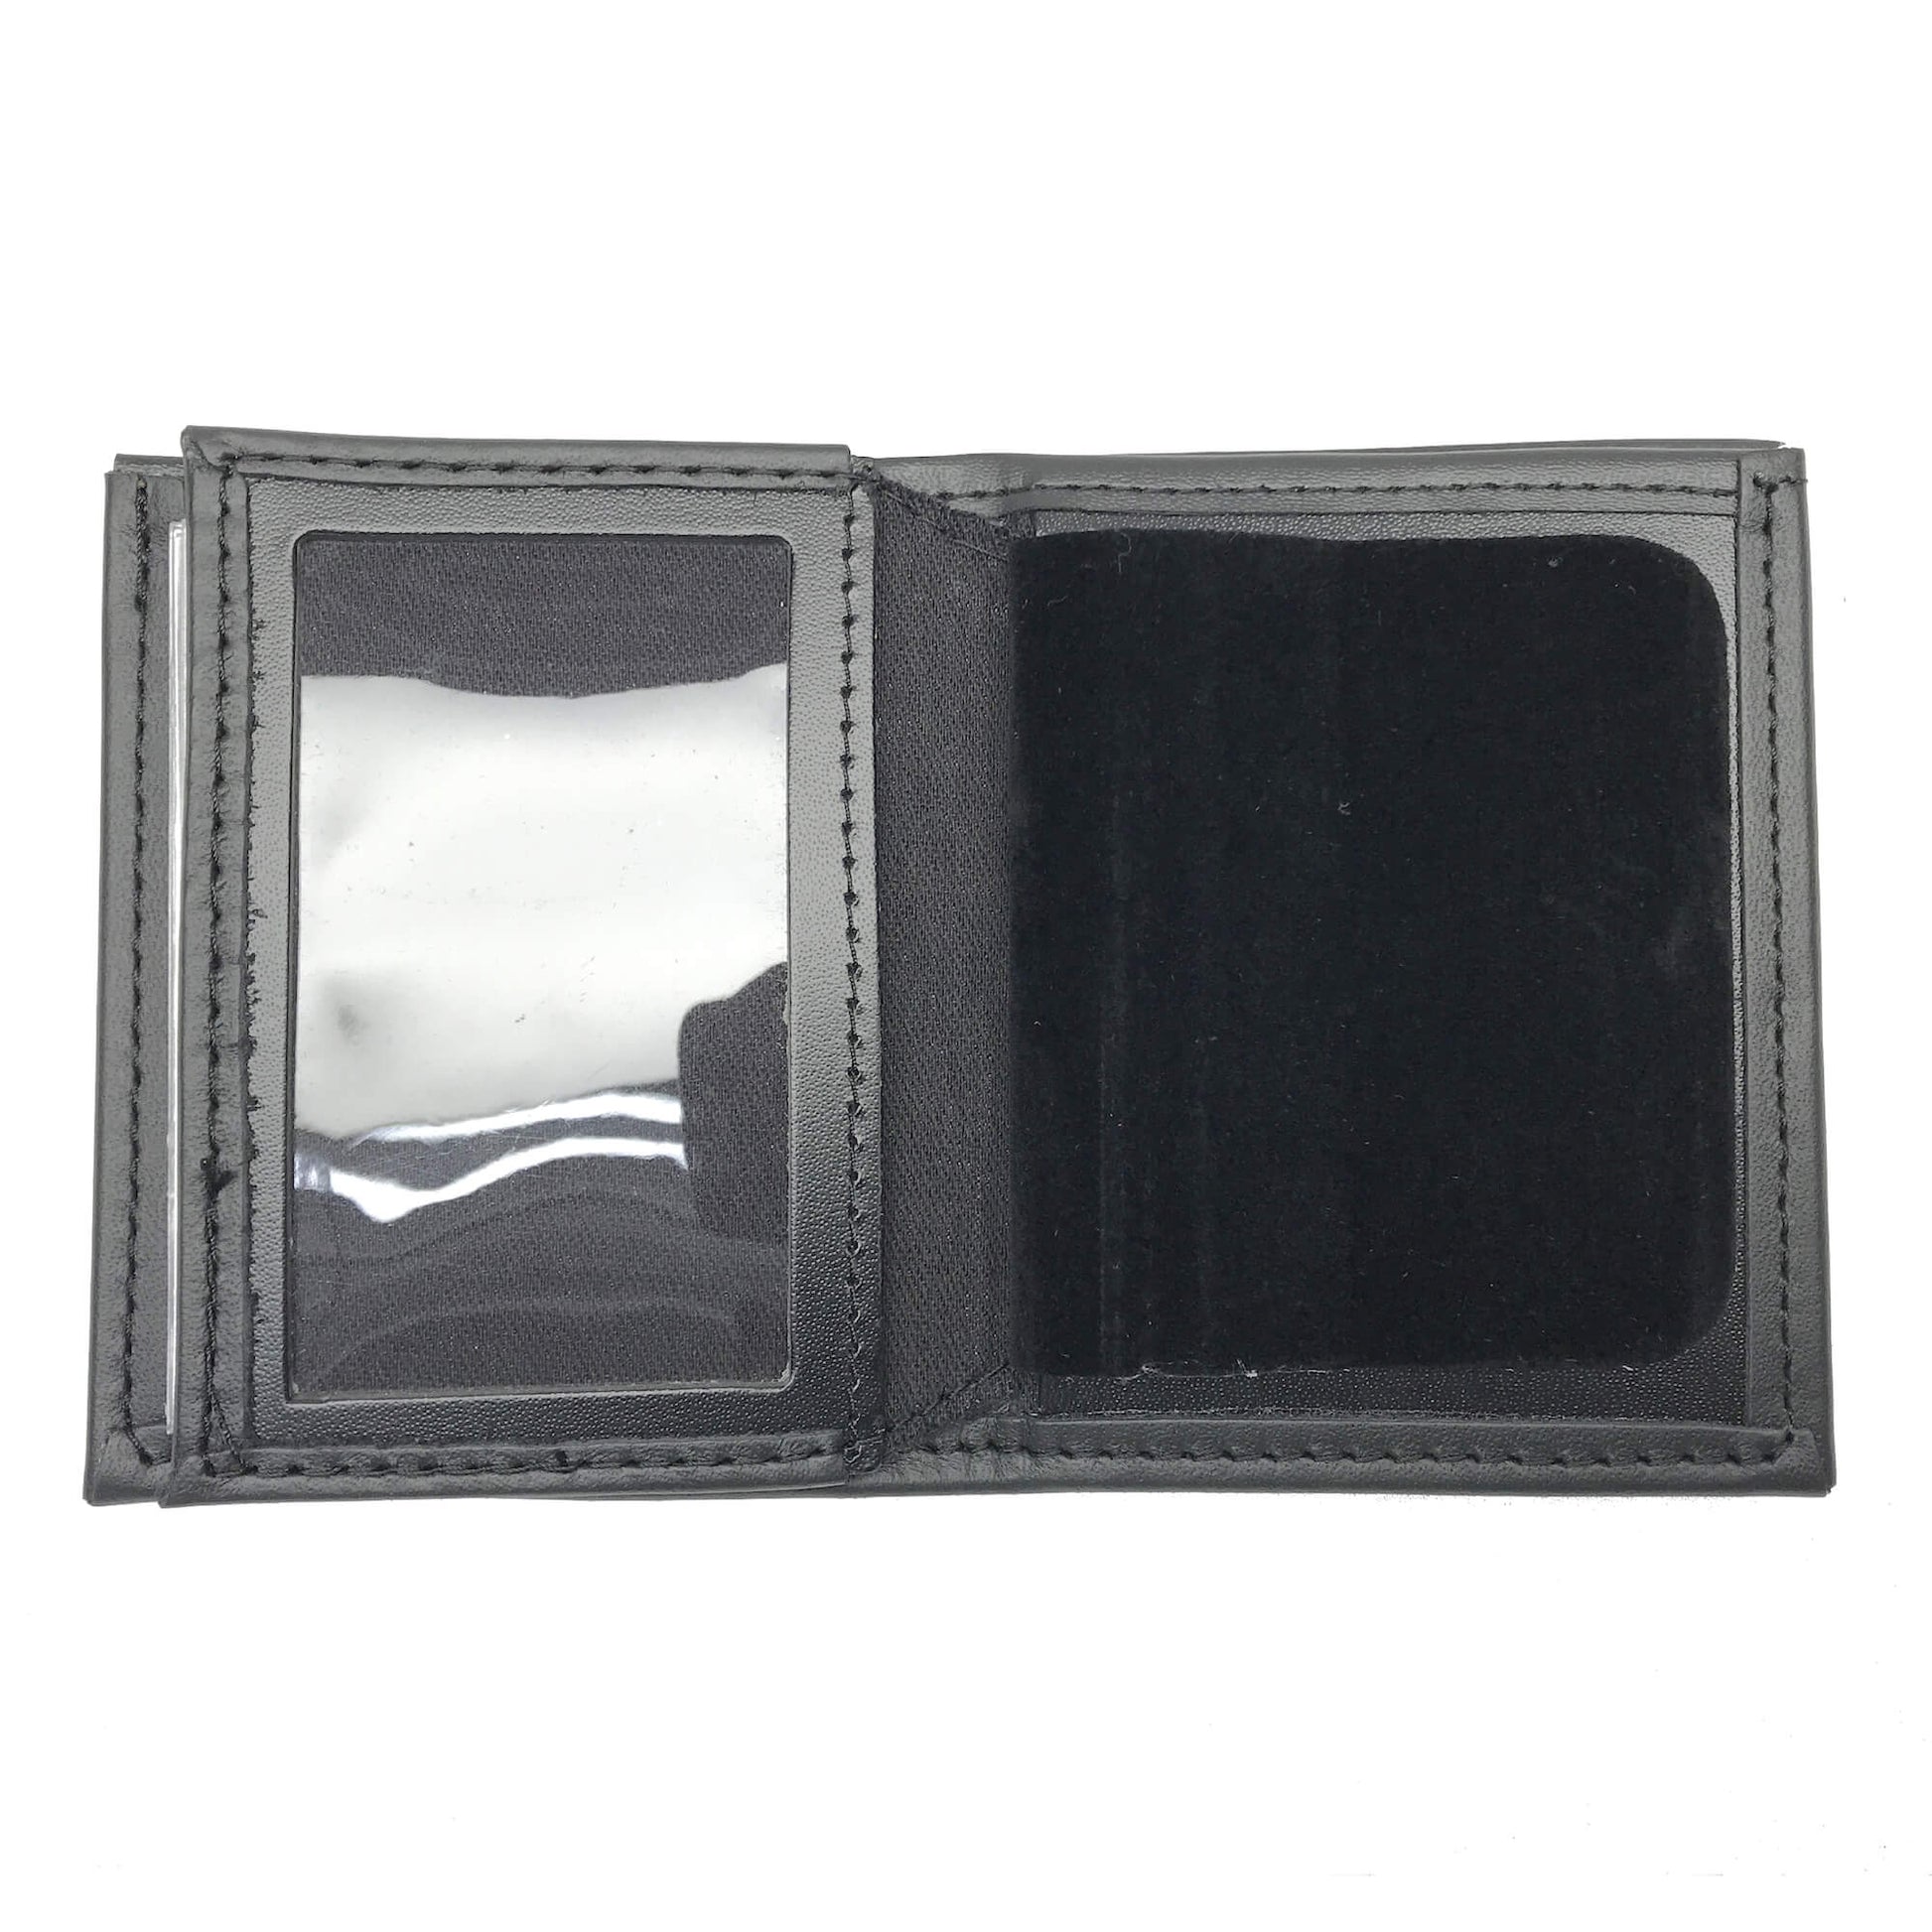 Concealed Weapons Permit Bifold Hidden Badge Wallet-Perfect Fit-911 Duty Gear USA